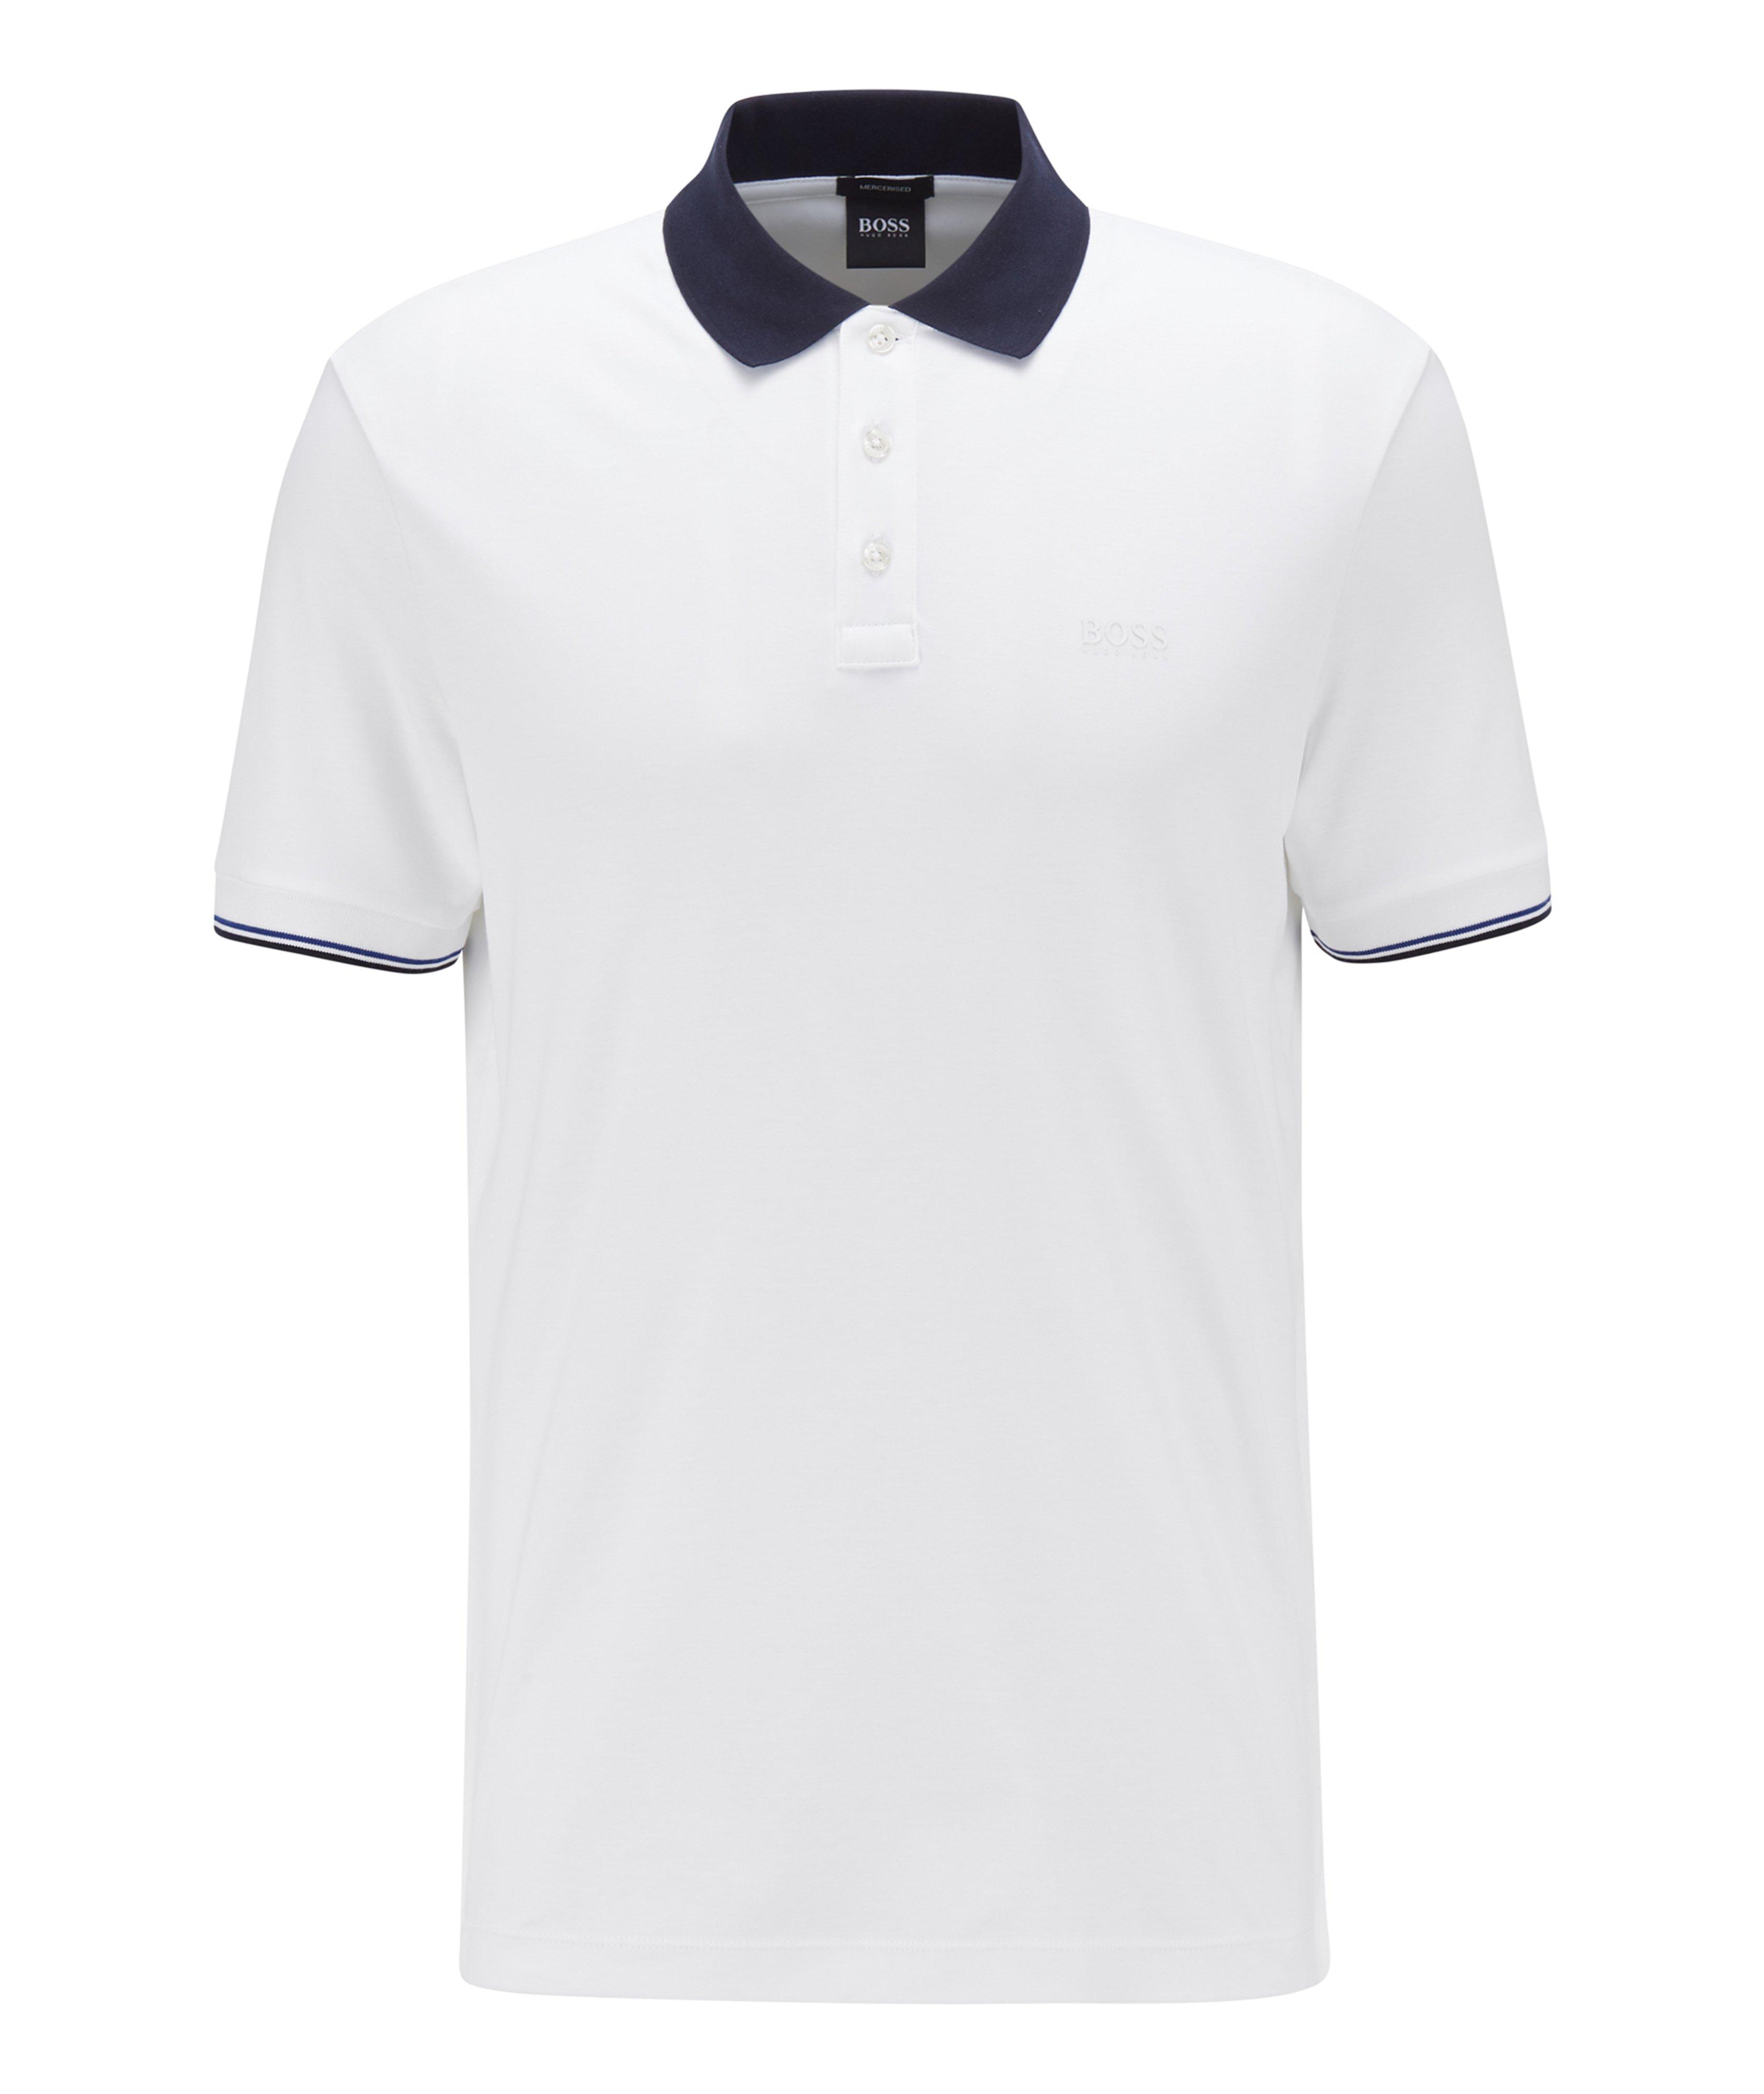 Parlay Contemporary-Fit Polo image 0